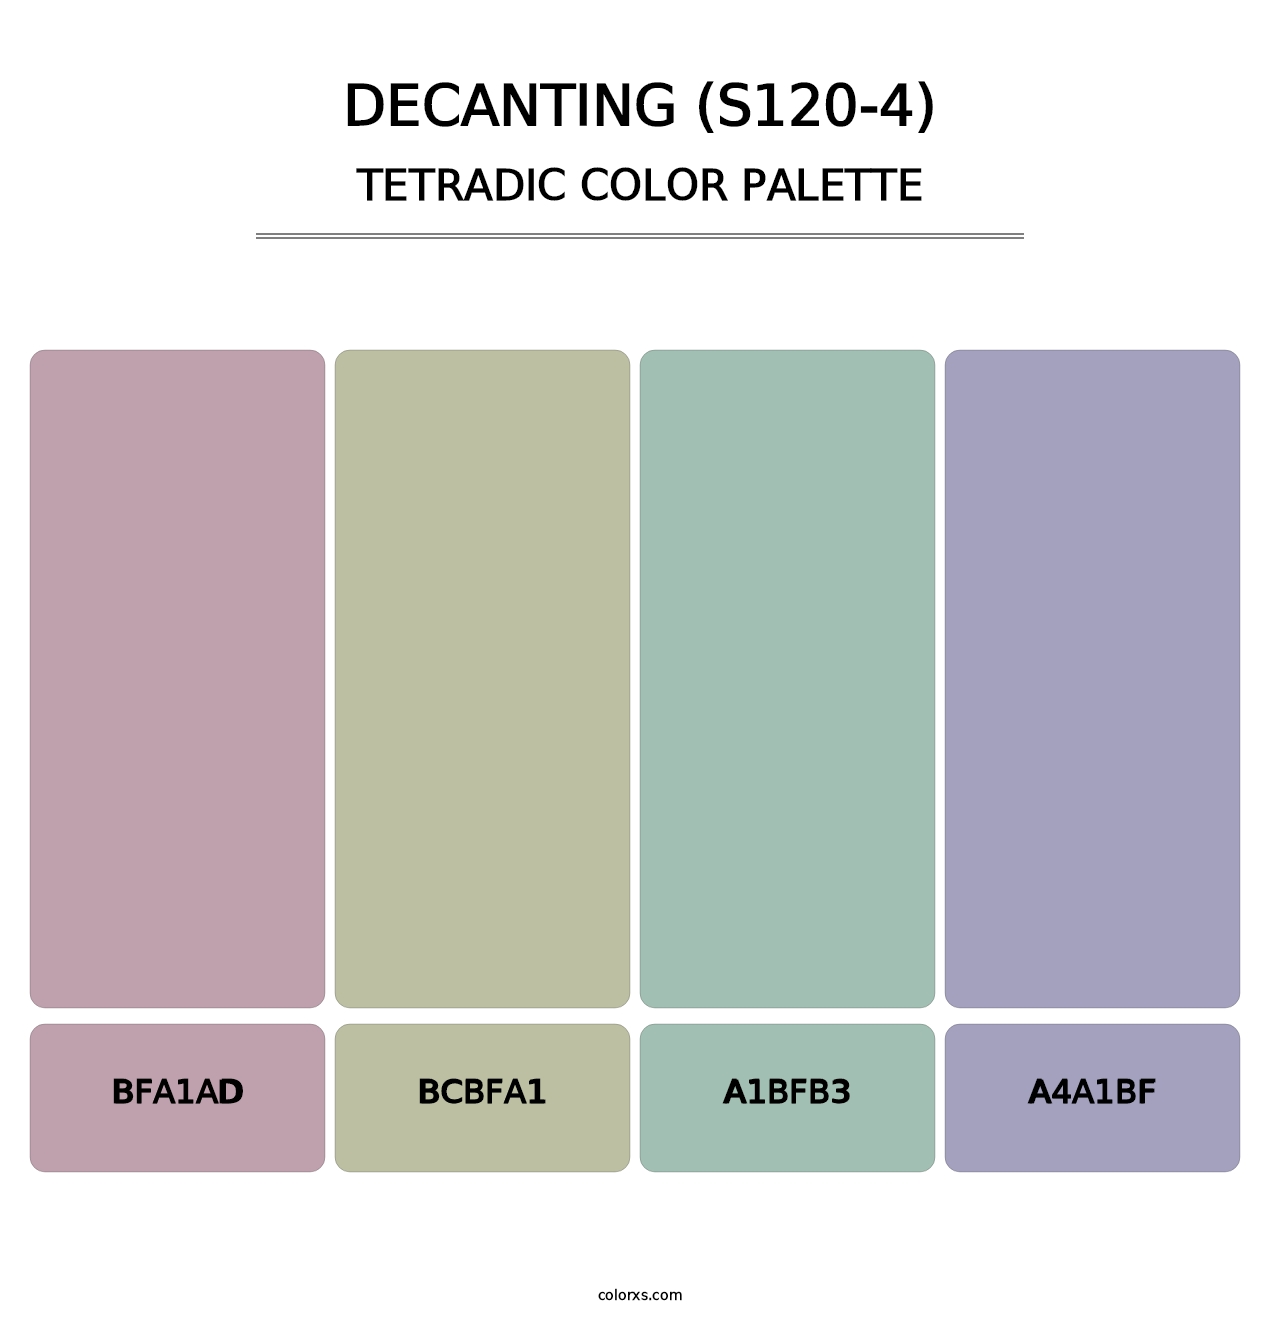 Decanting (S120-4) - Tetradic Color Palette